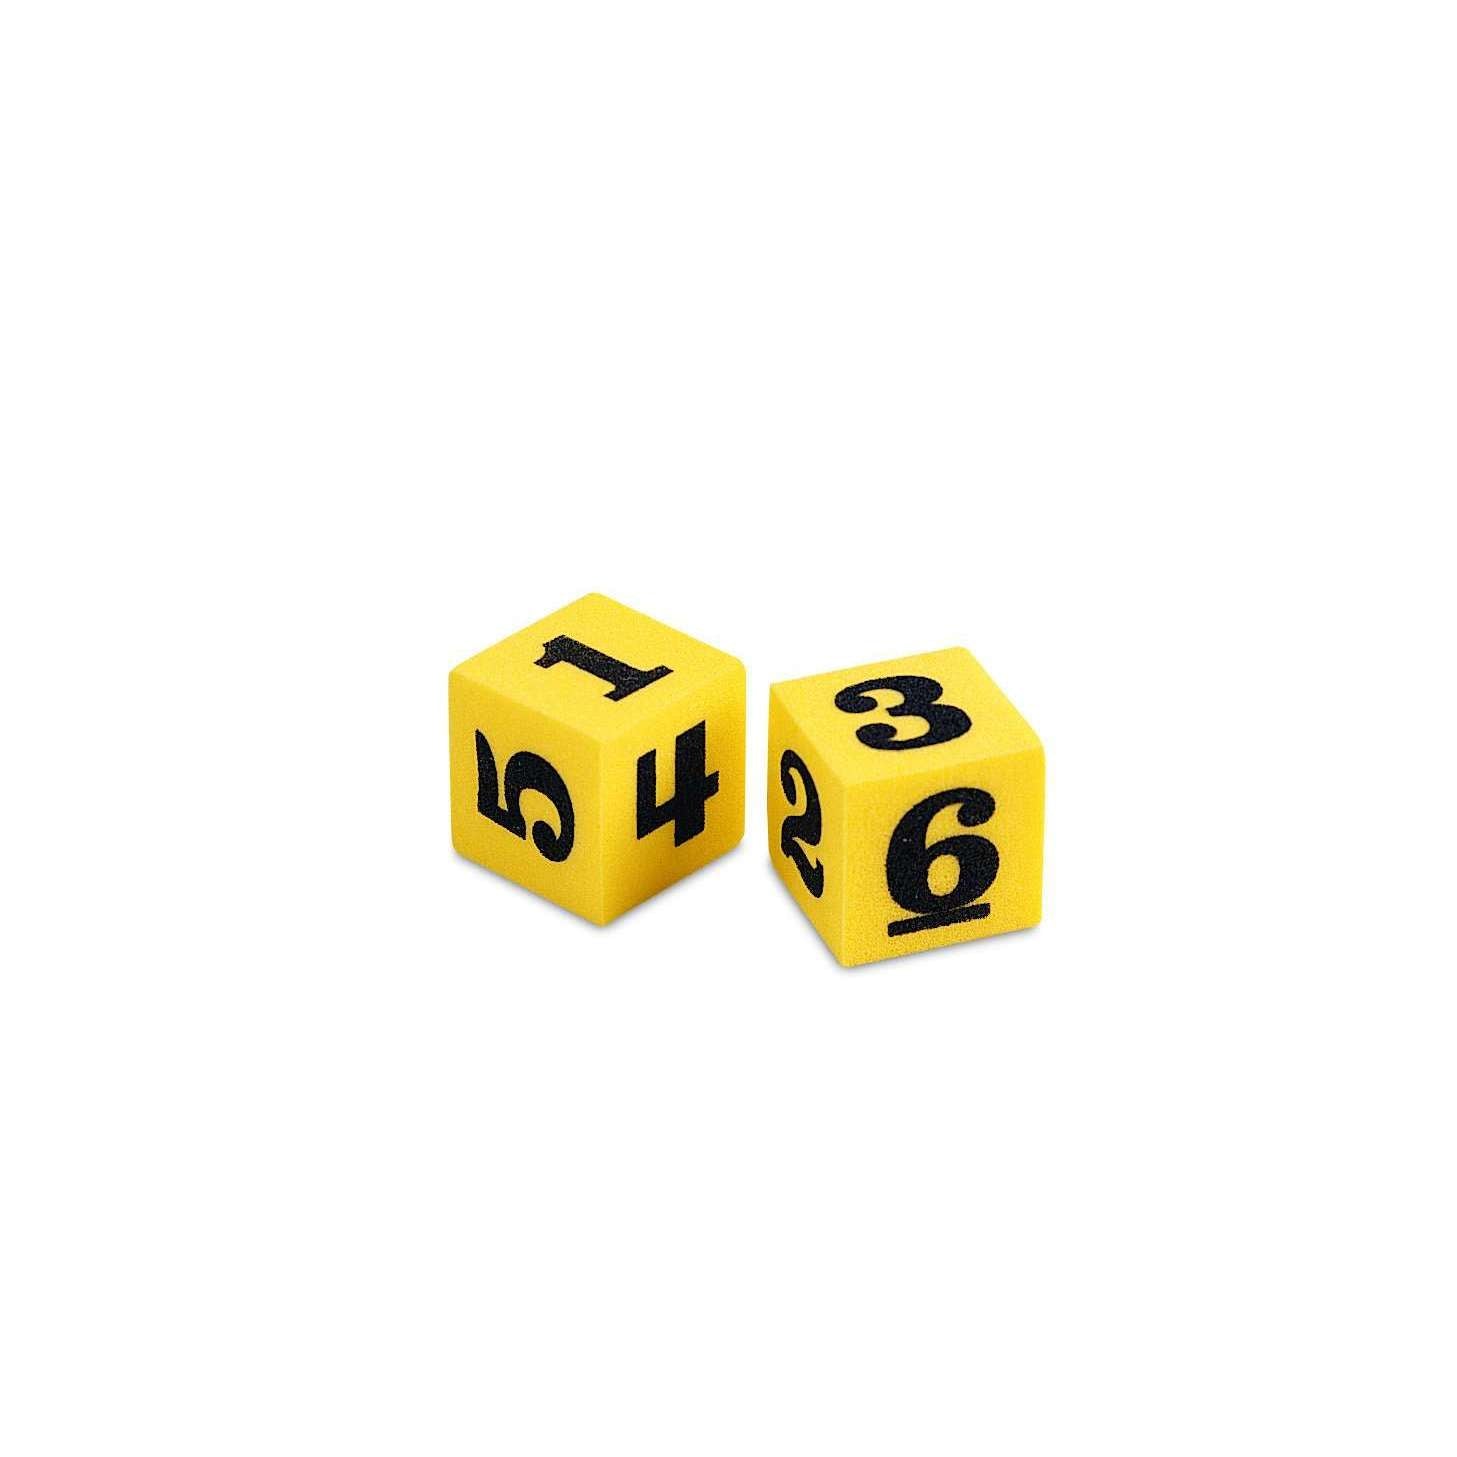 Soft Foam Number Dice - Pack of 5:Primary Classroom Resources